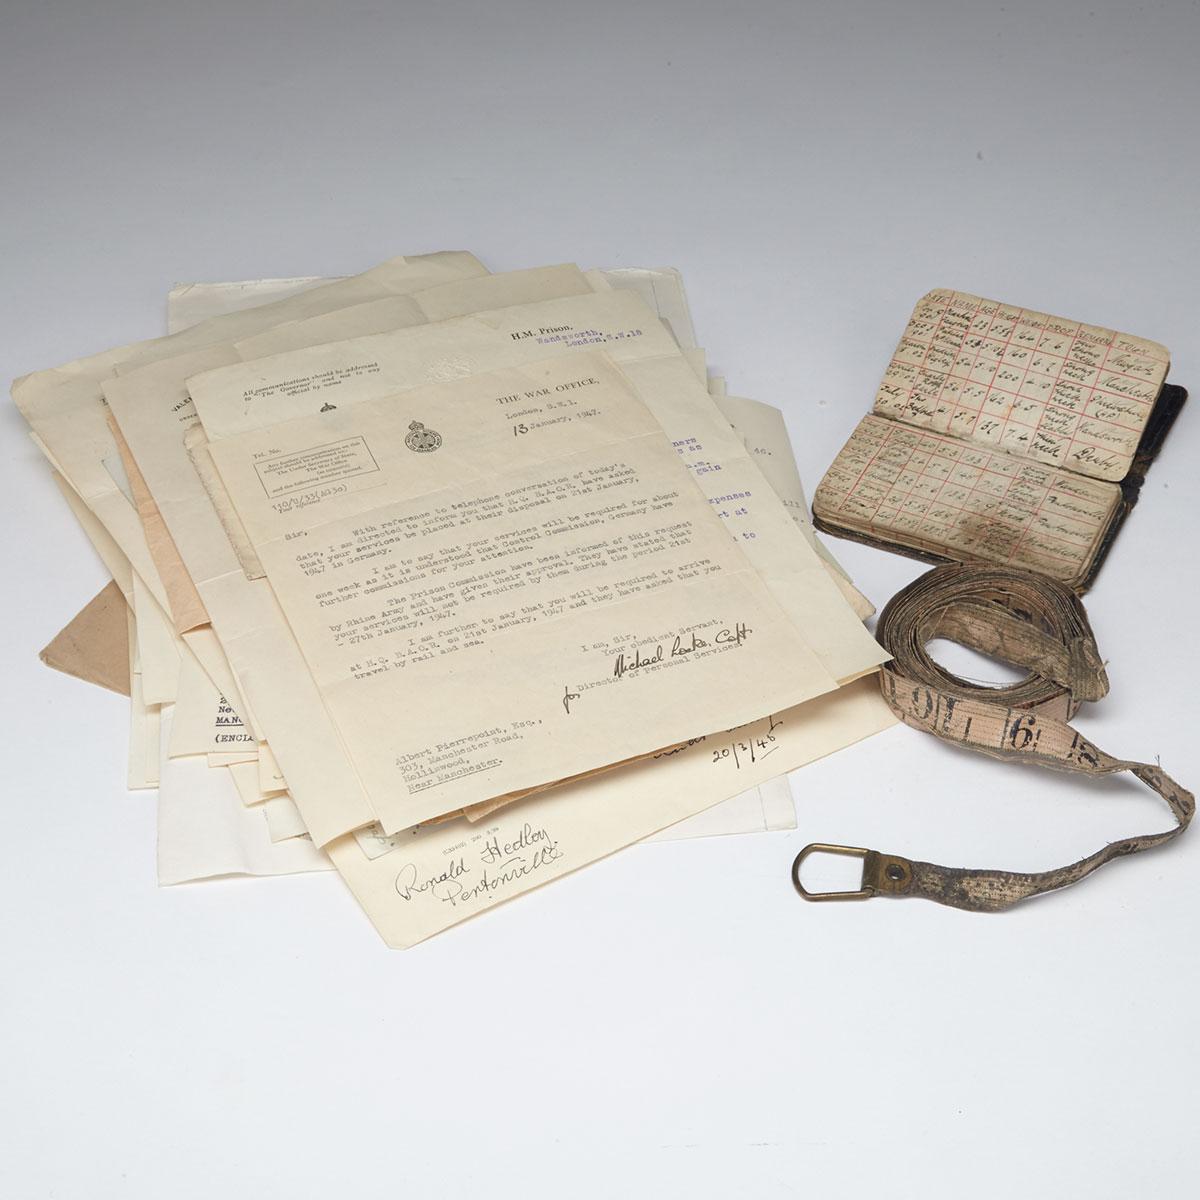 Archive of Material formerly the Property of Hangman Henry Albert Pierrepoint (1878-1922)